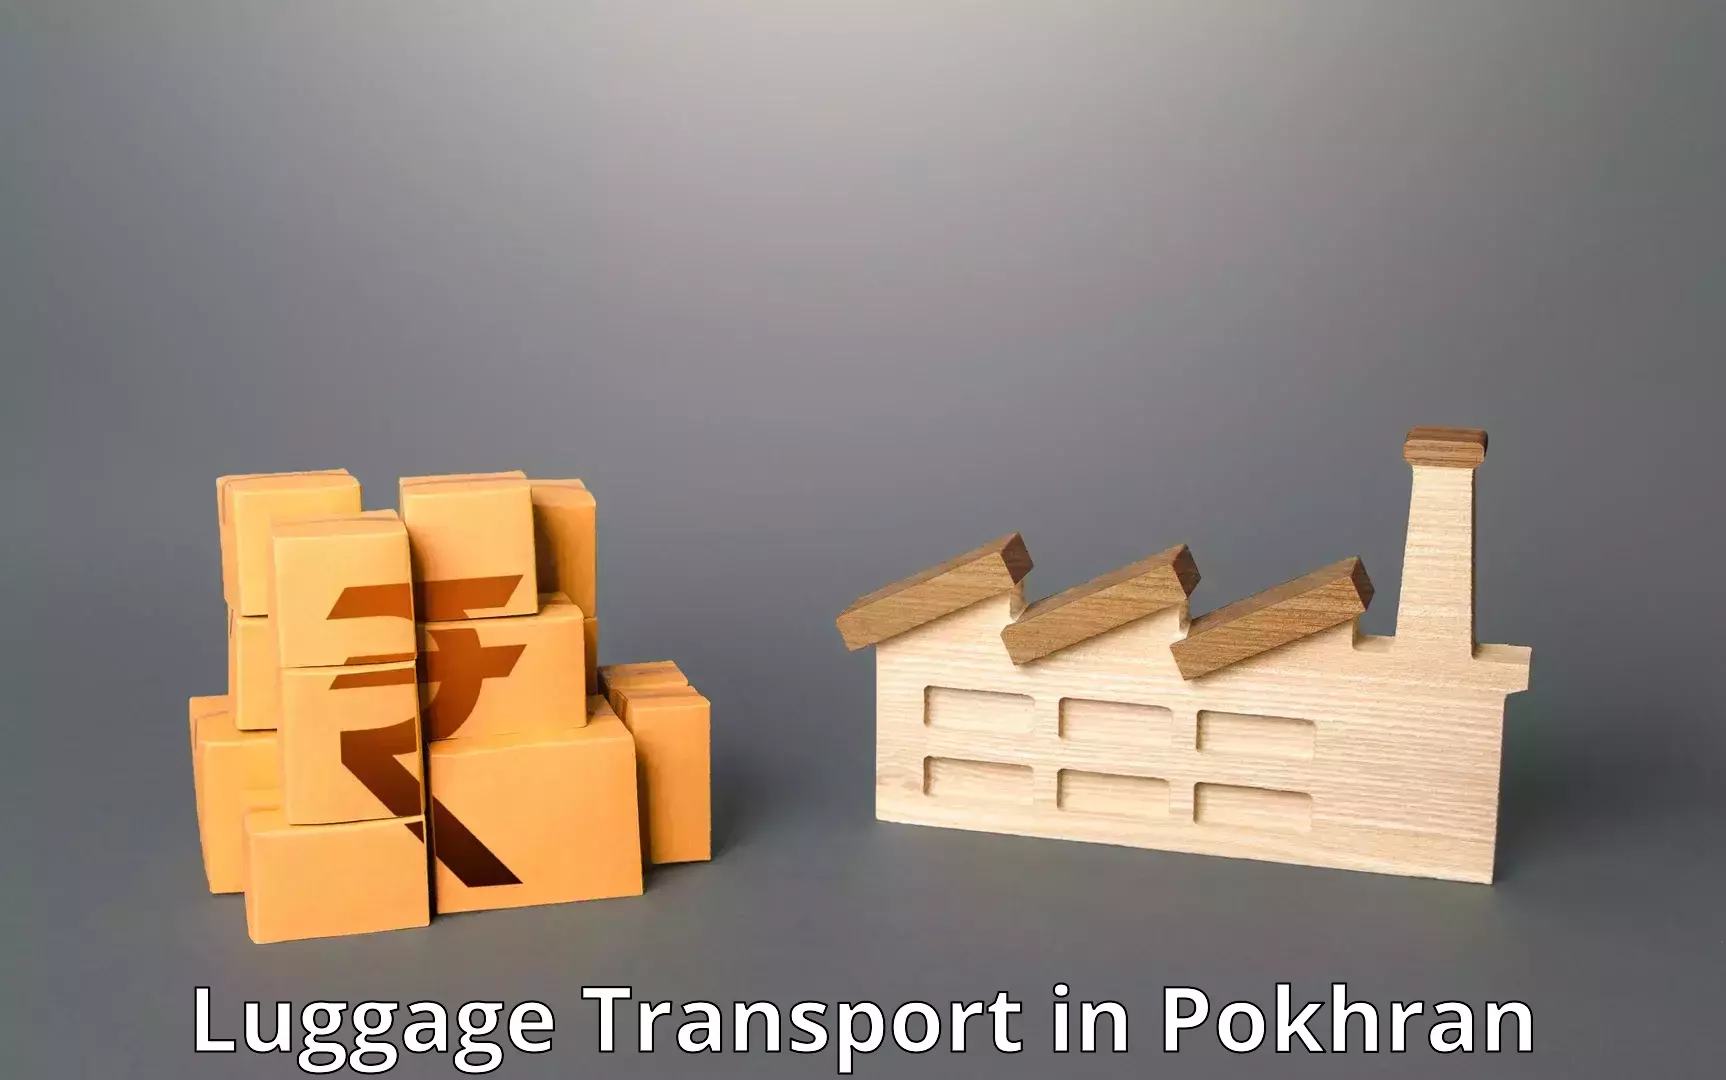 Luggage shipping discounts in Pokhran